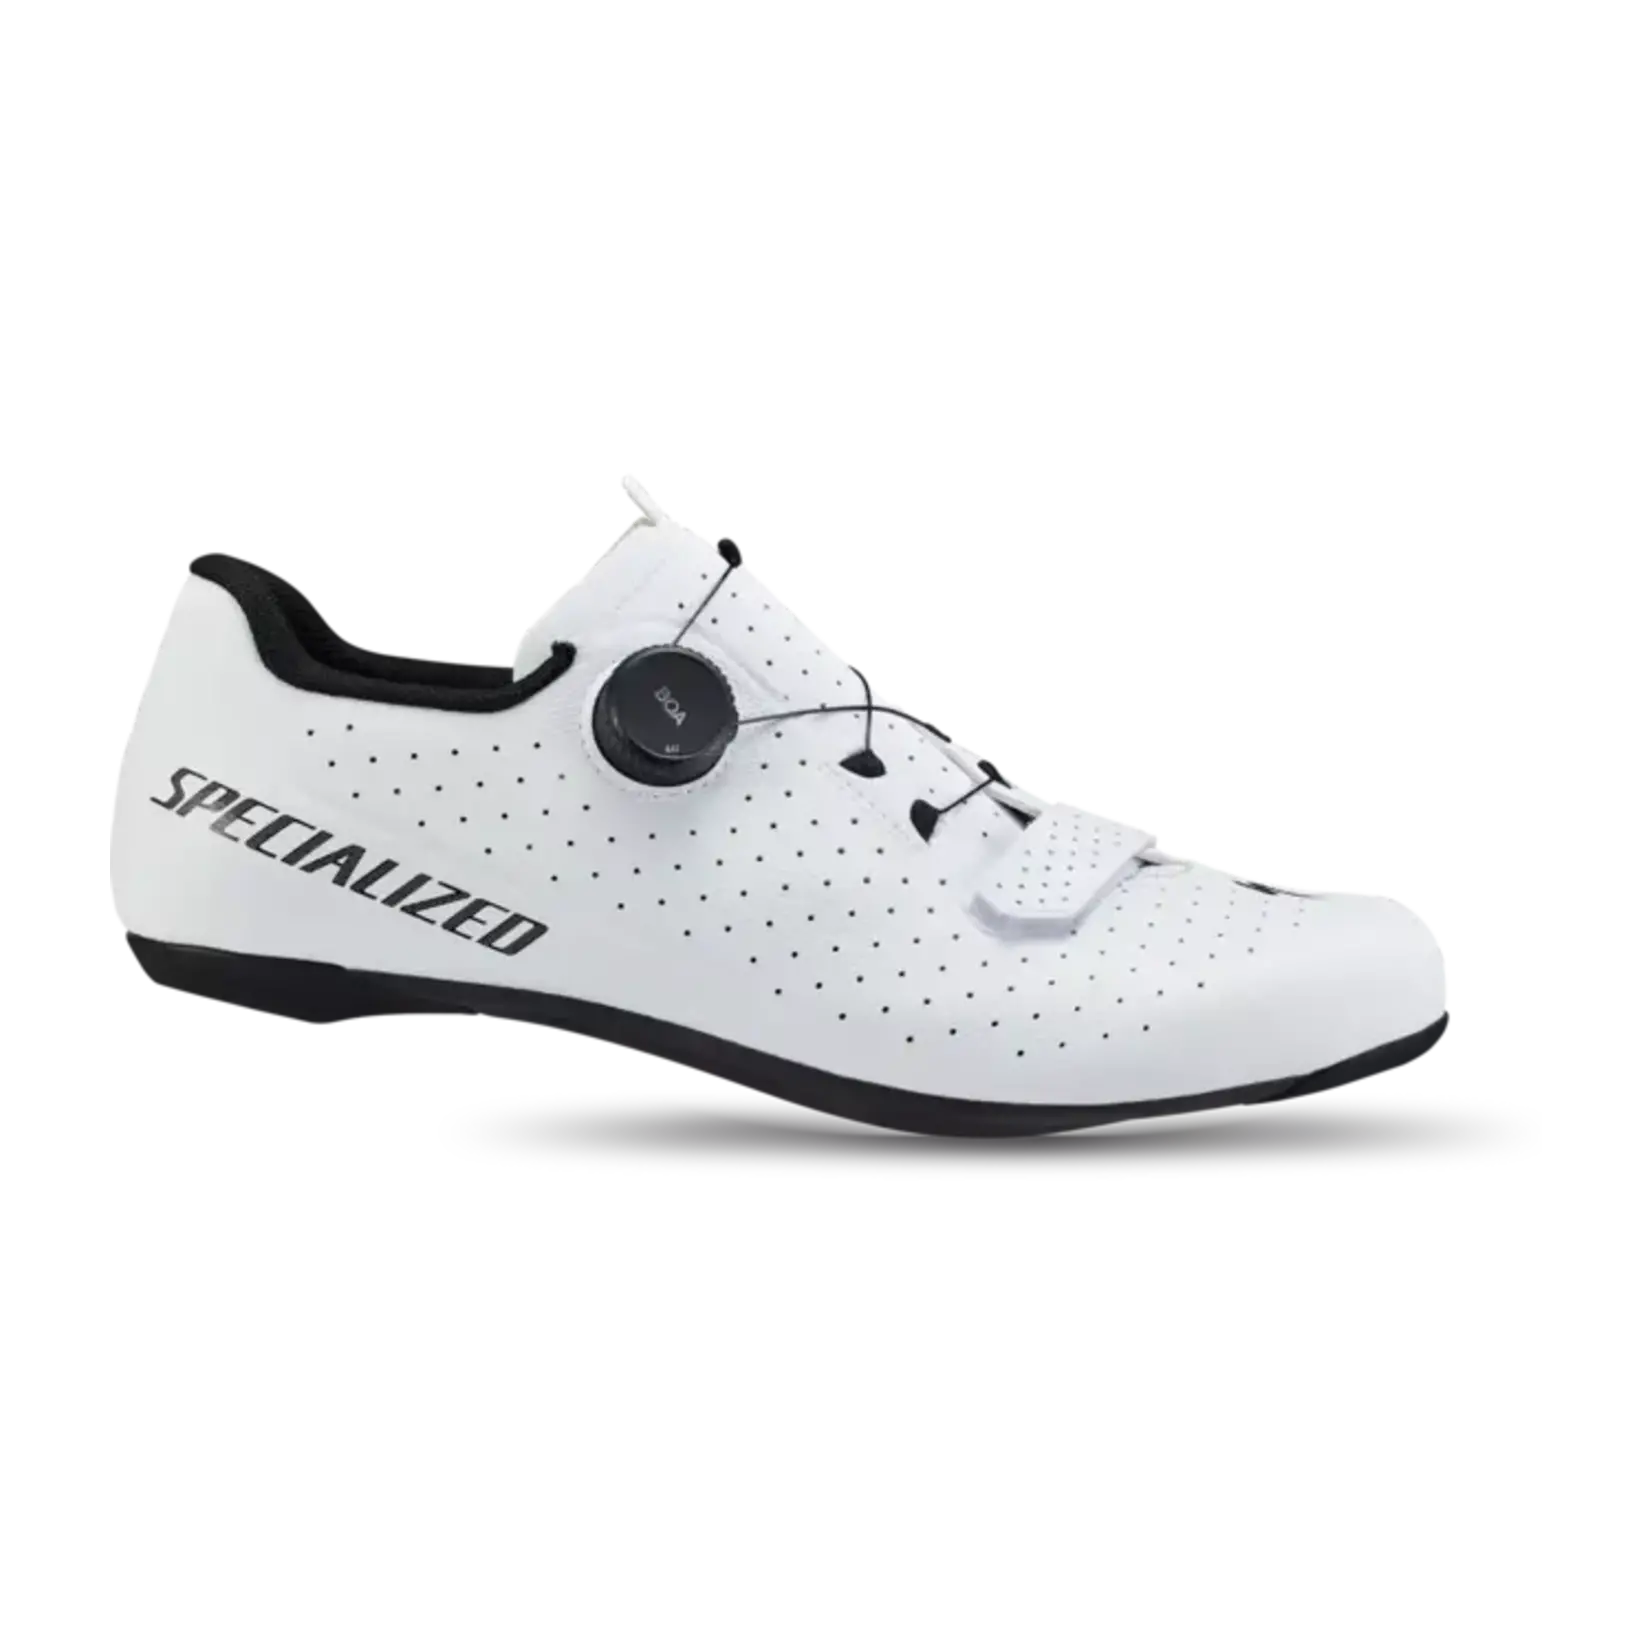 Specialized Chaussures de route Torch 2.0